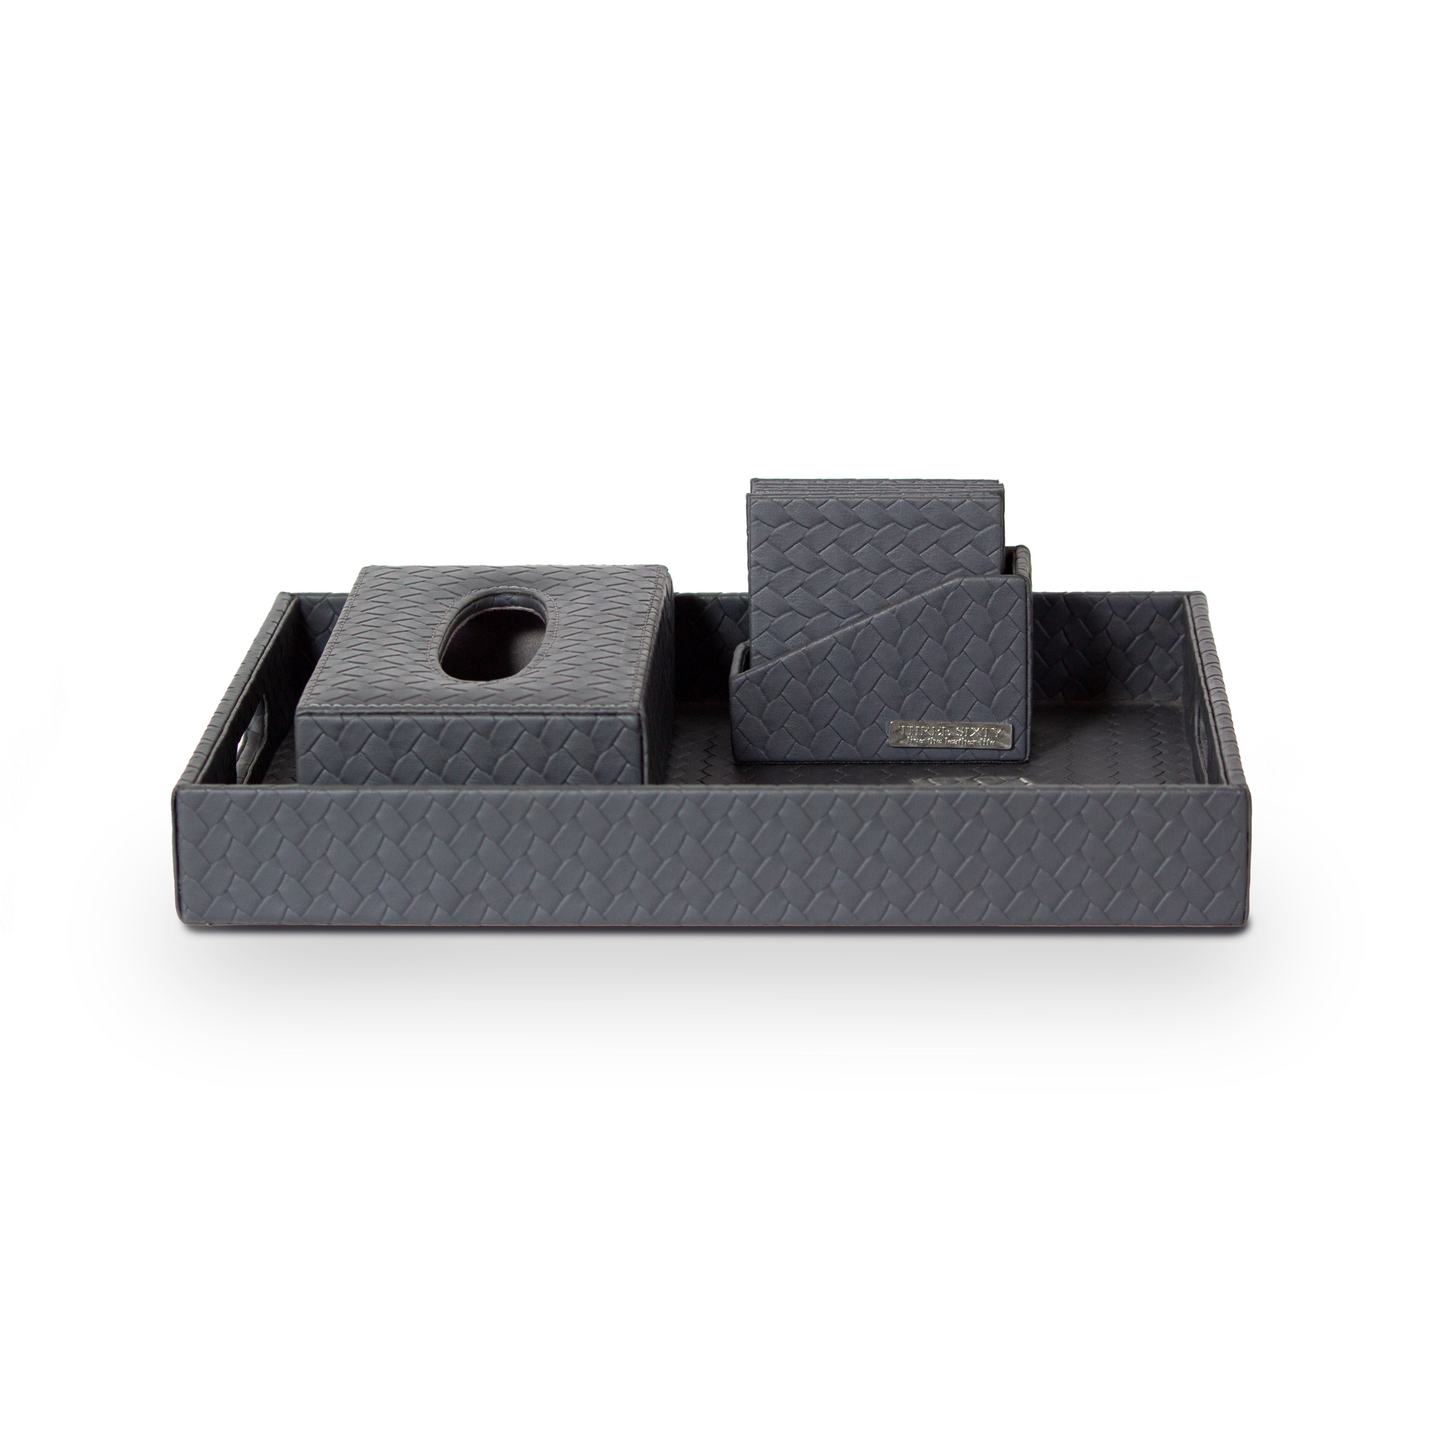 Leather Tray Set with Tissue Box & Coasters Grey